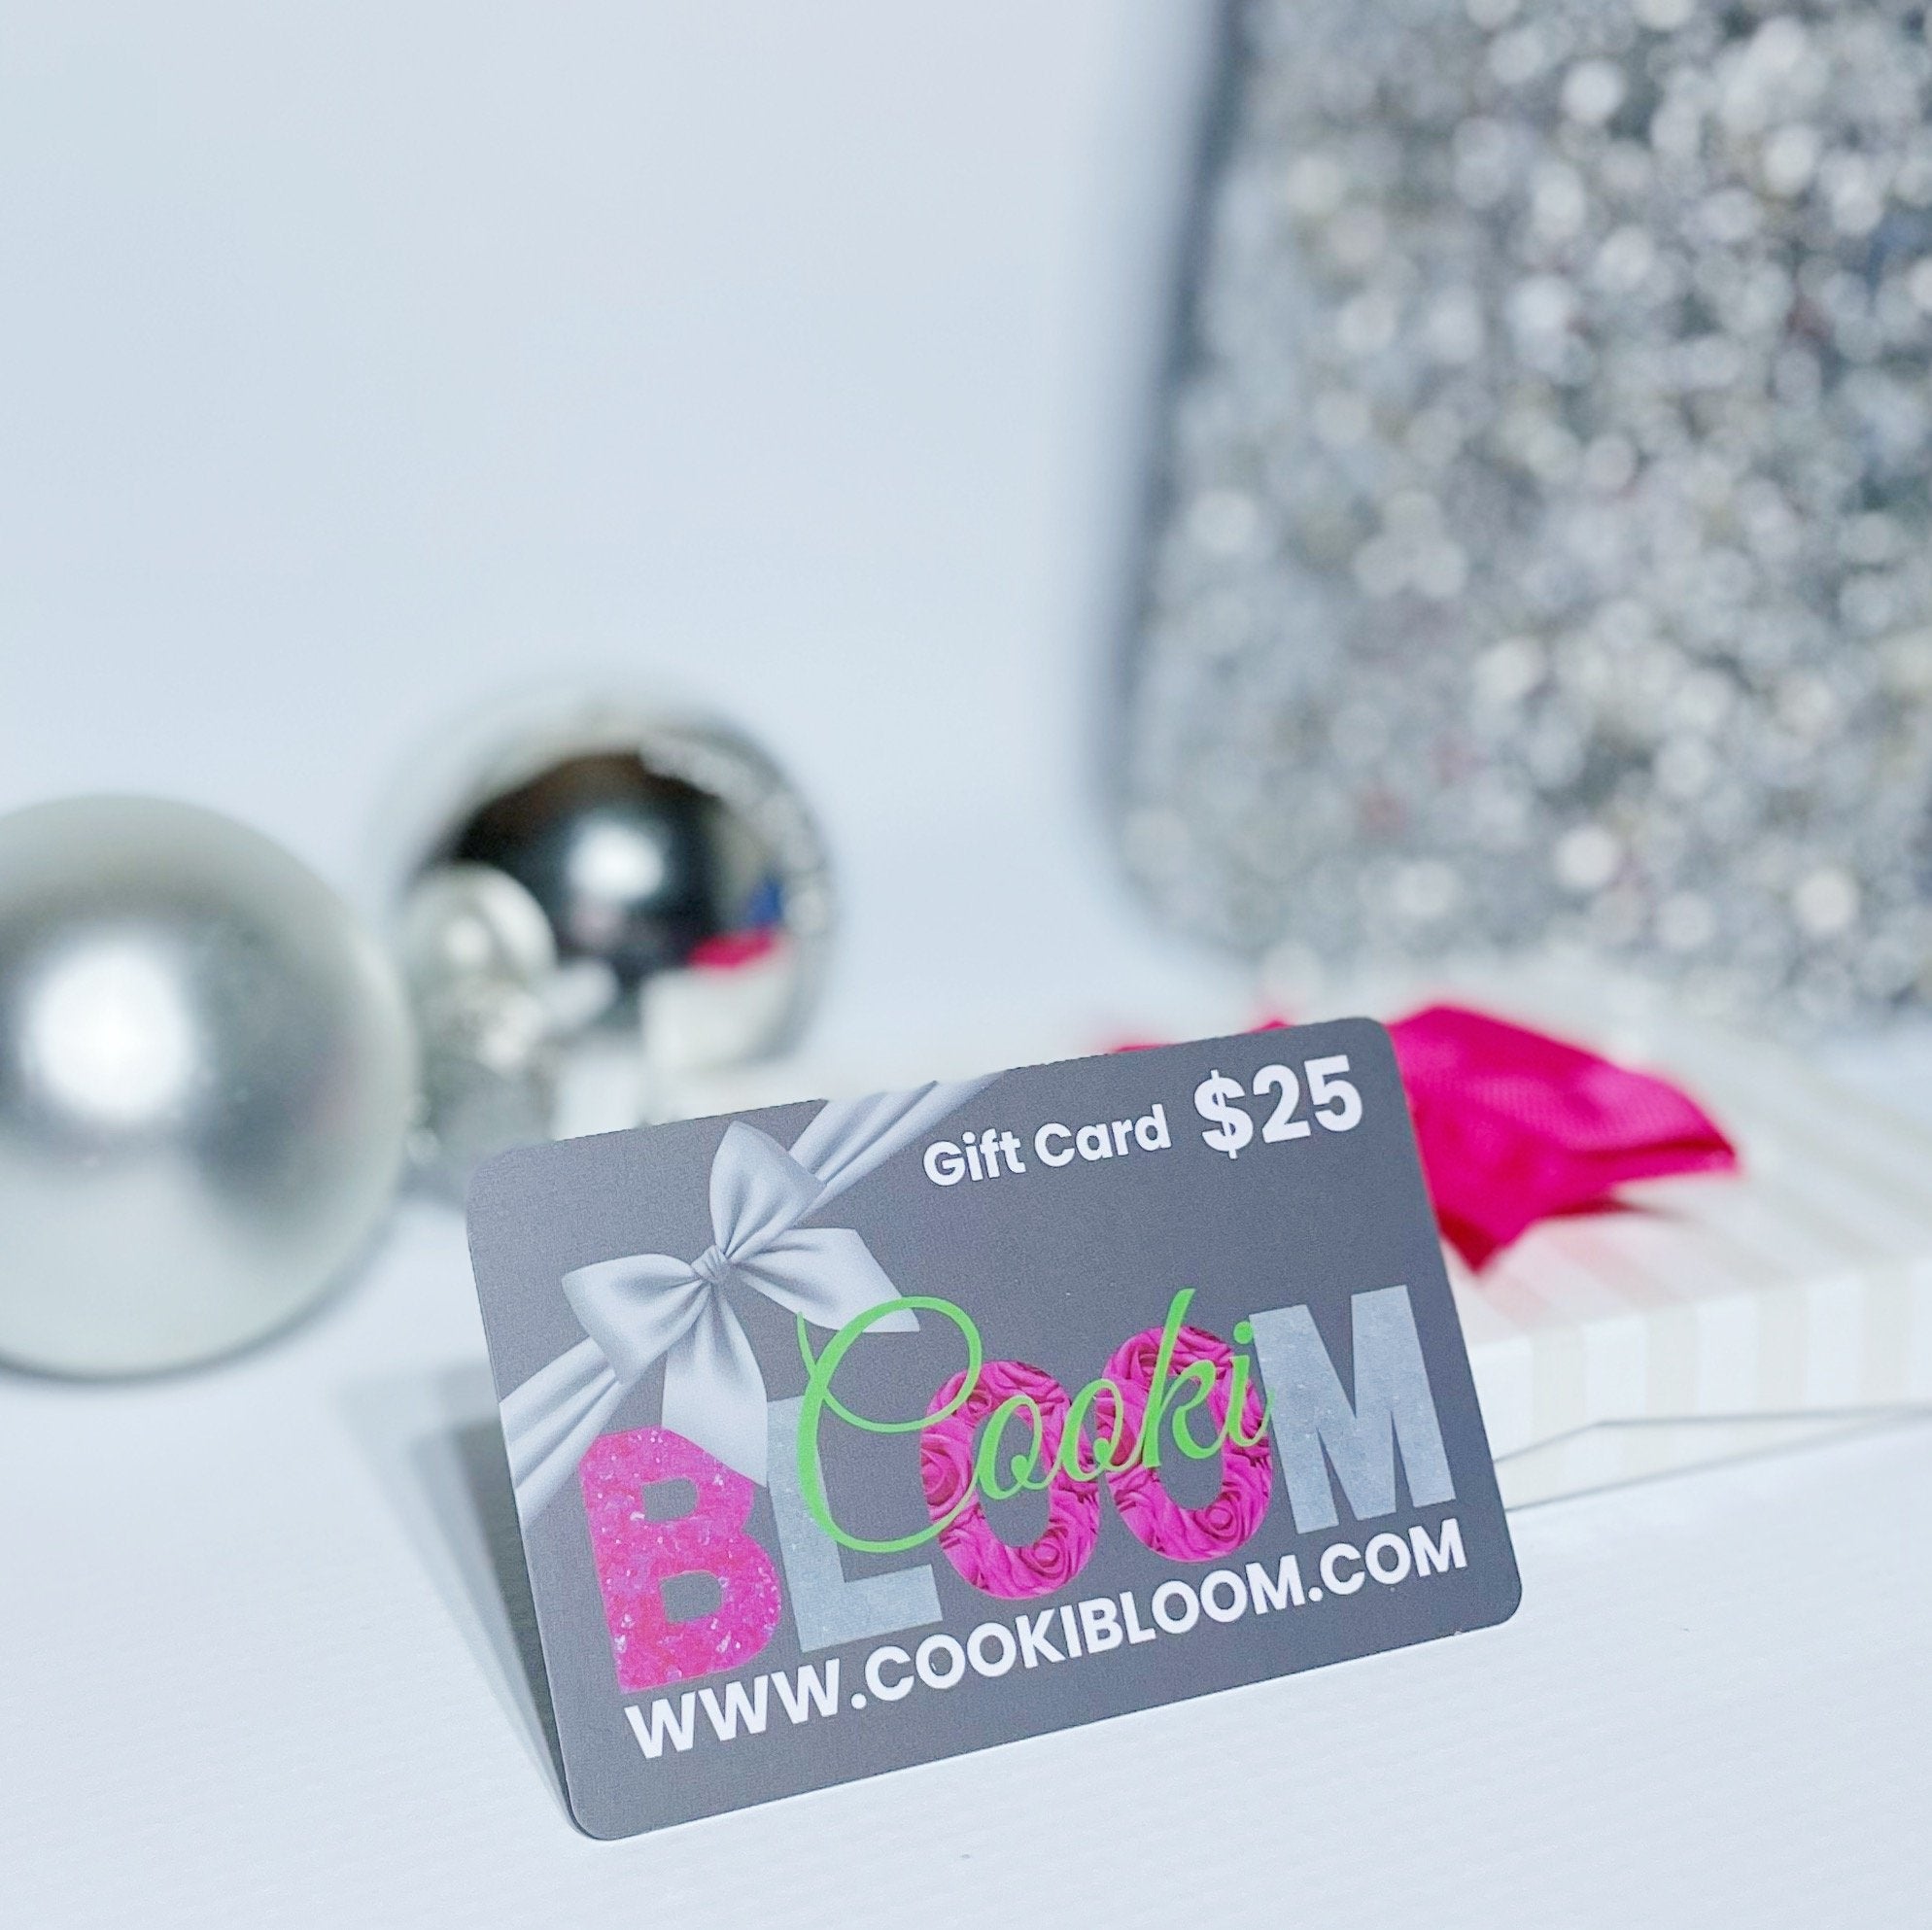 CookiBloom Gift Cards Cooki Bloom Gift Card